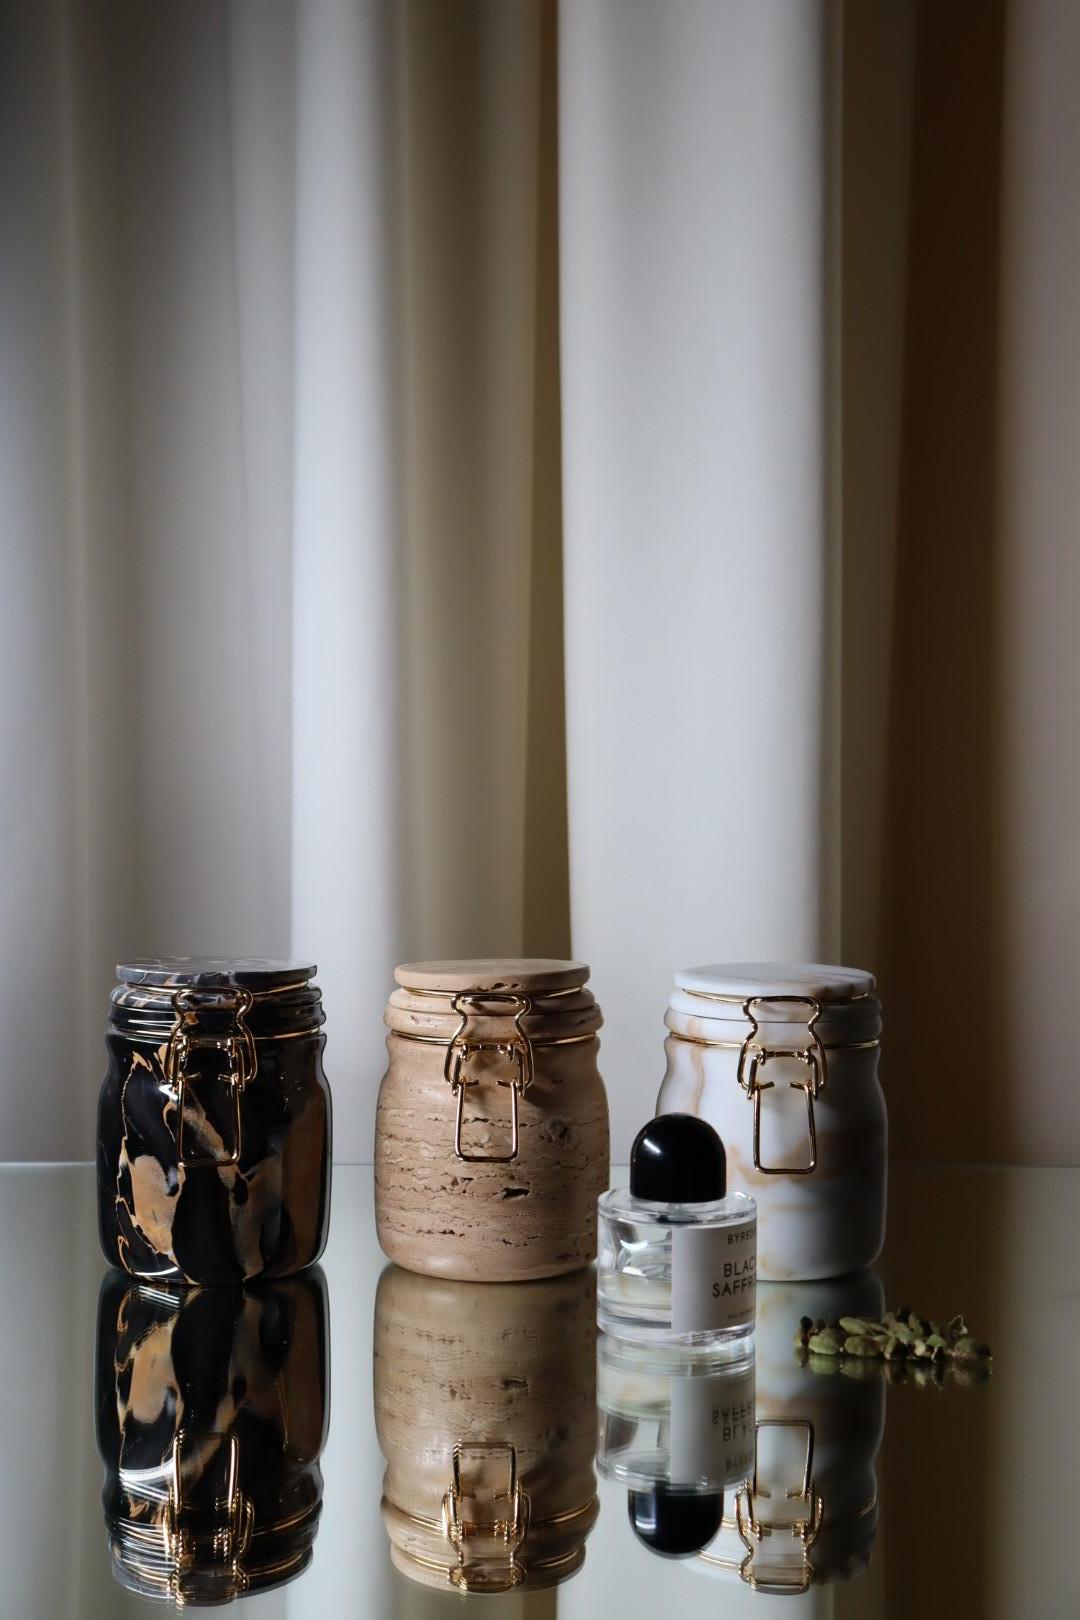 Miss Marble is the traditional marmalade jar, produced with the highest quality marbles coming from Tuscan caves and is entirely hand-made by expert artisans.
Miss Marble is produced in matt Calacatta marble and golden latch.
Each jar is unique,